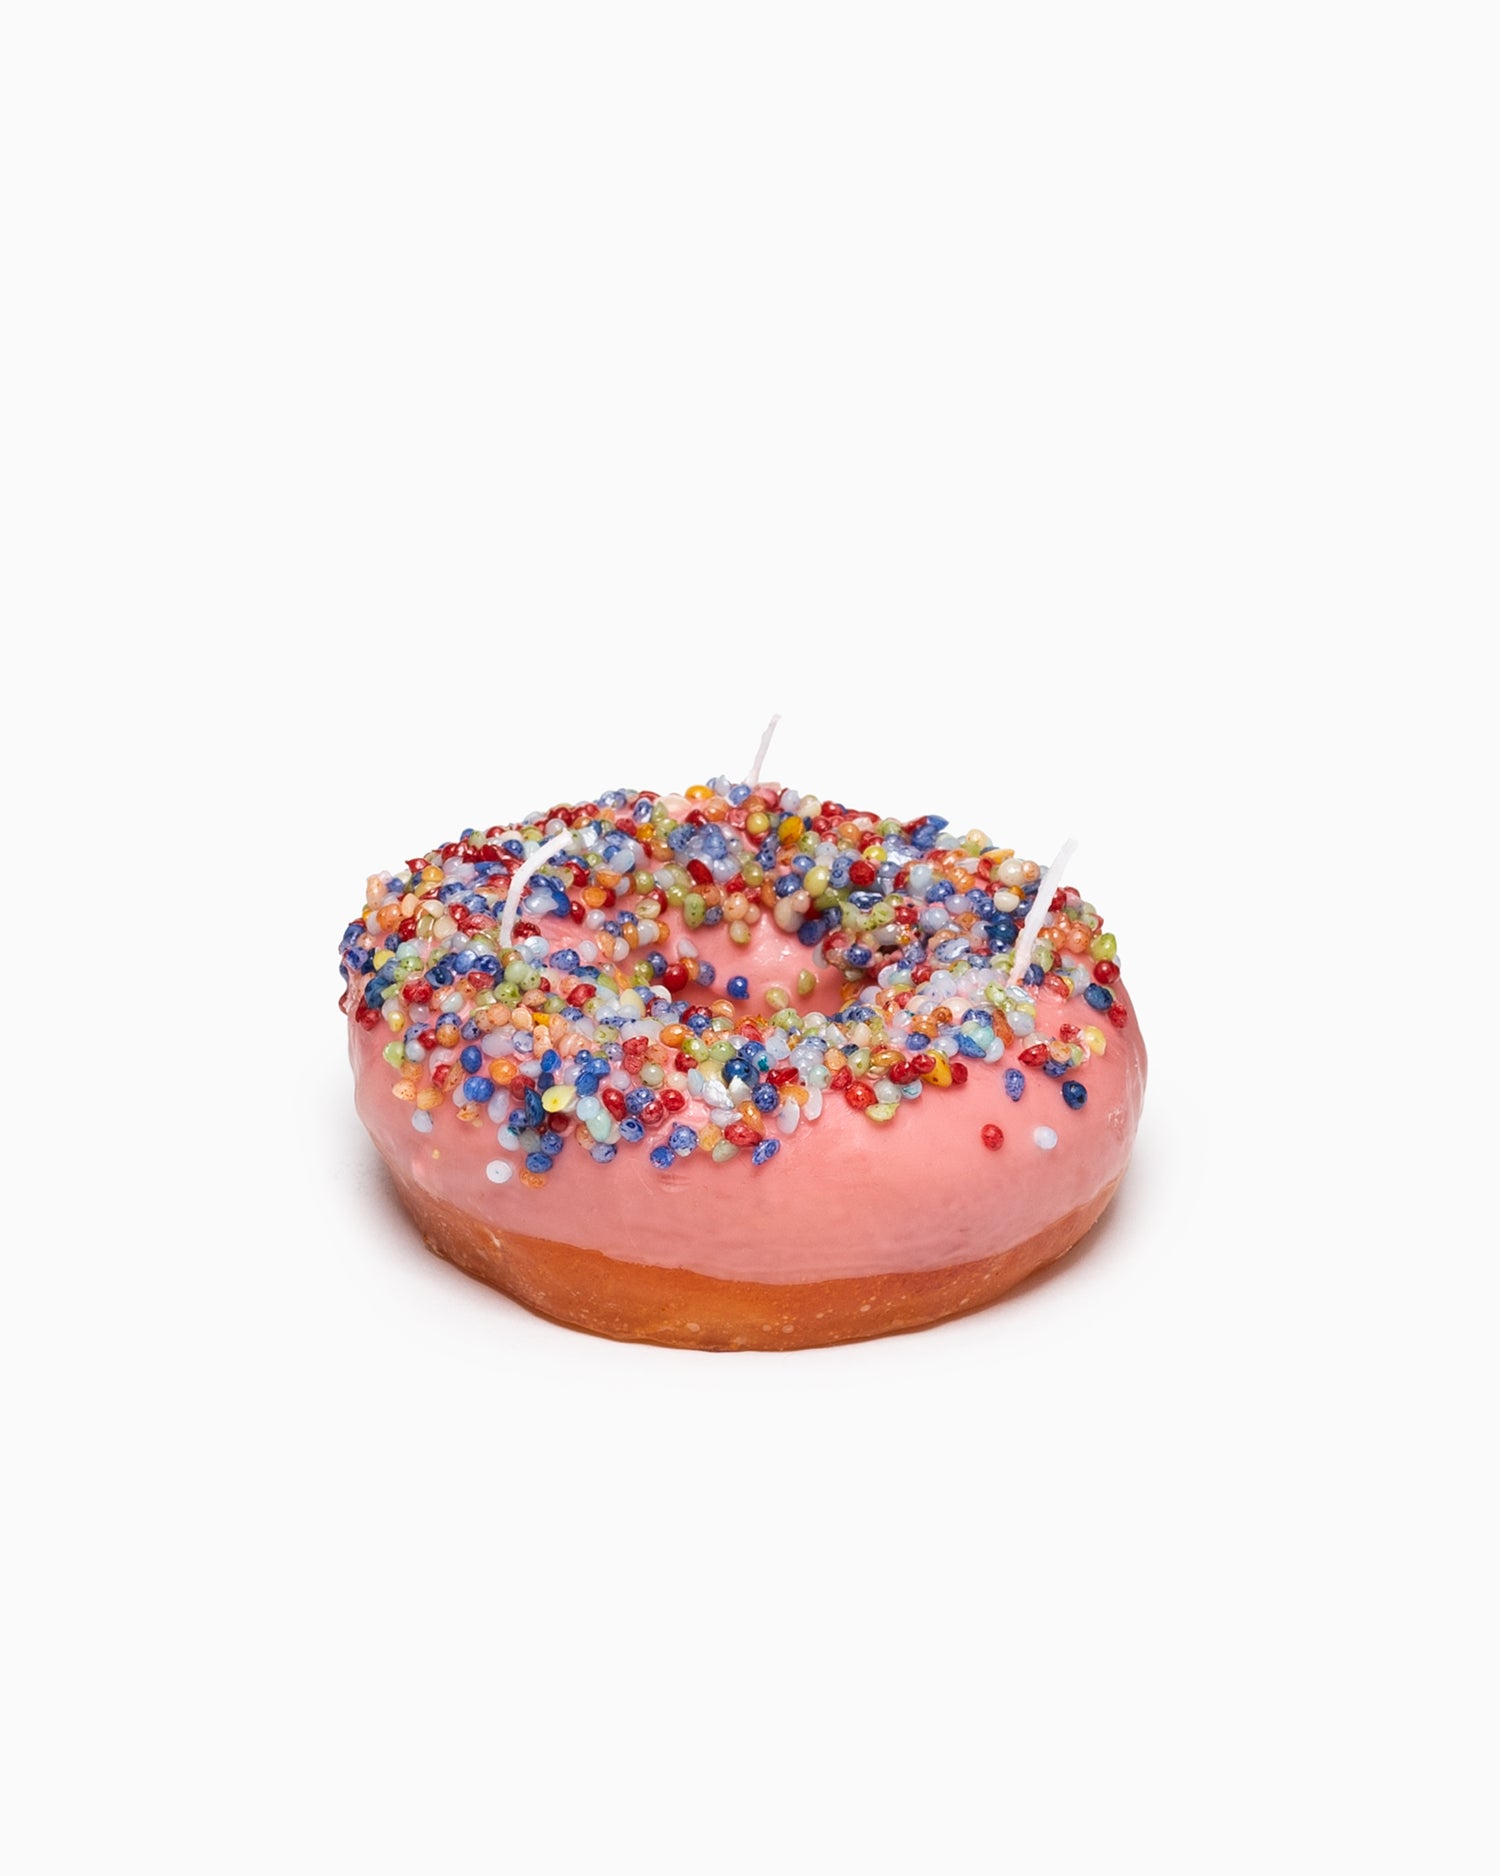 Donut Candle - Pink Glazed with Rainbow Sprinkles